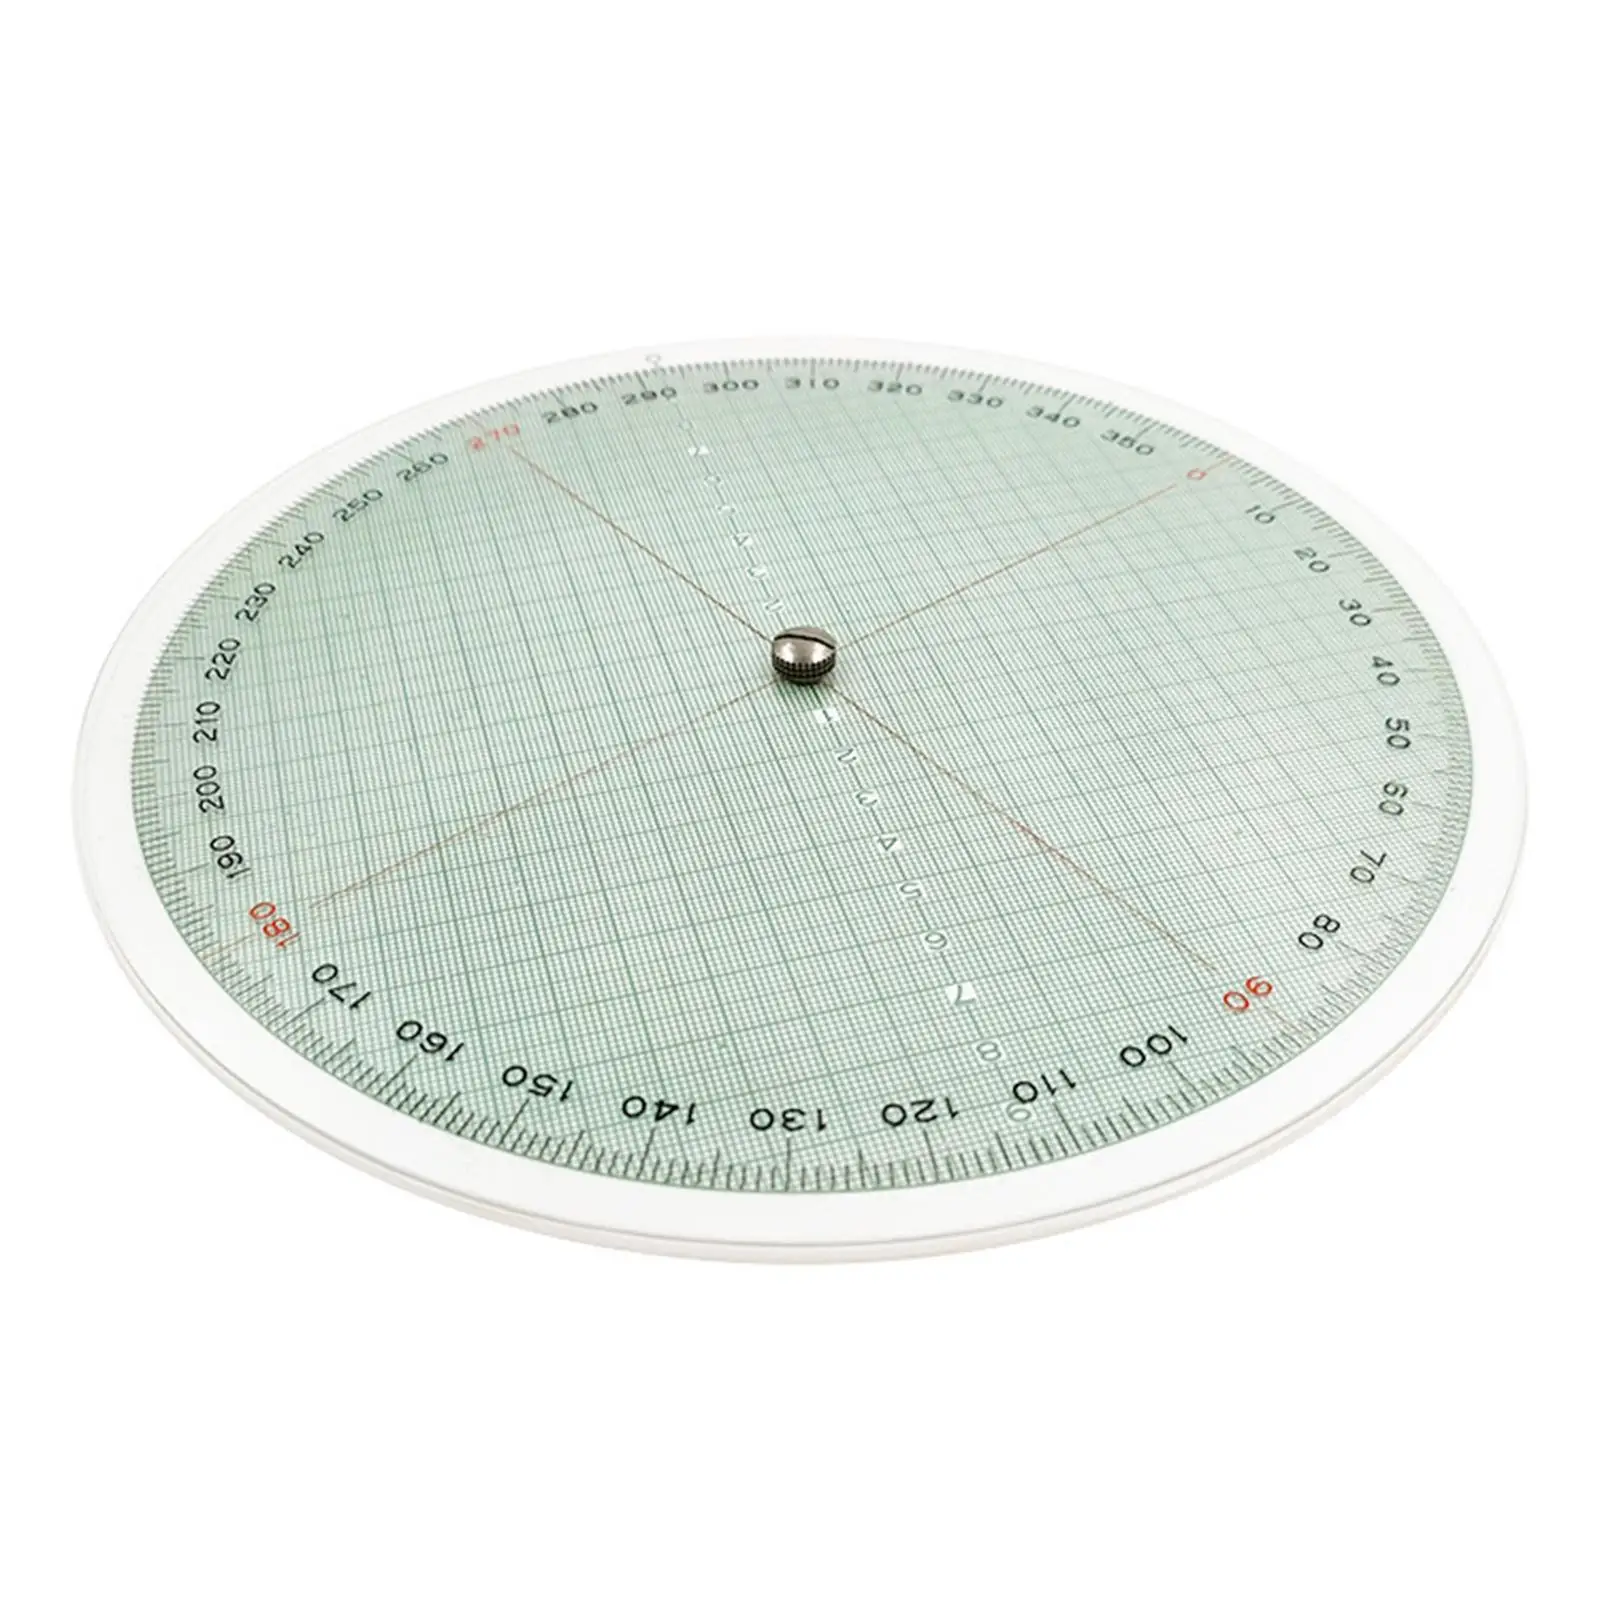 Nautical Slide Rule Slide Rule Calculator Lightweight Stable Easy to Use Accs Durable Navigation Tool Sailing Circular Ruler